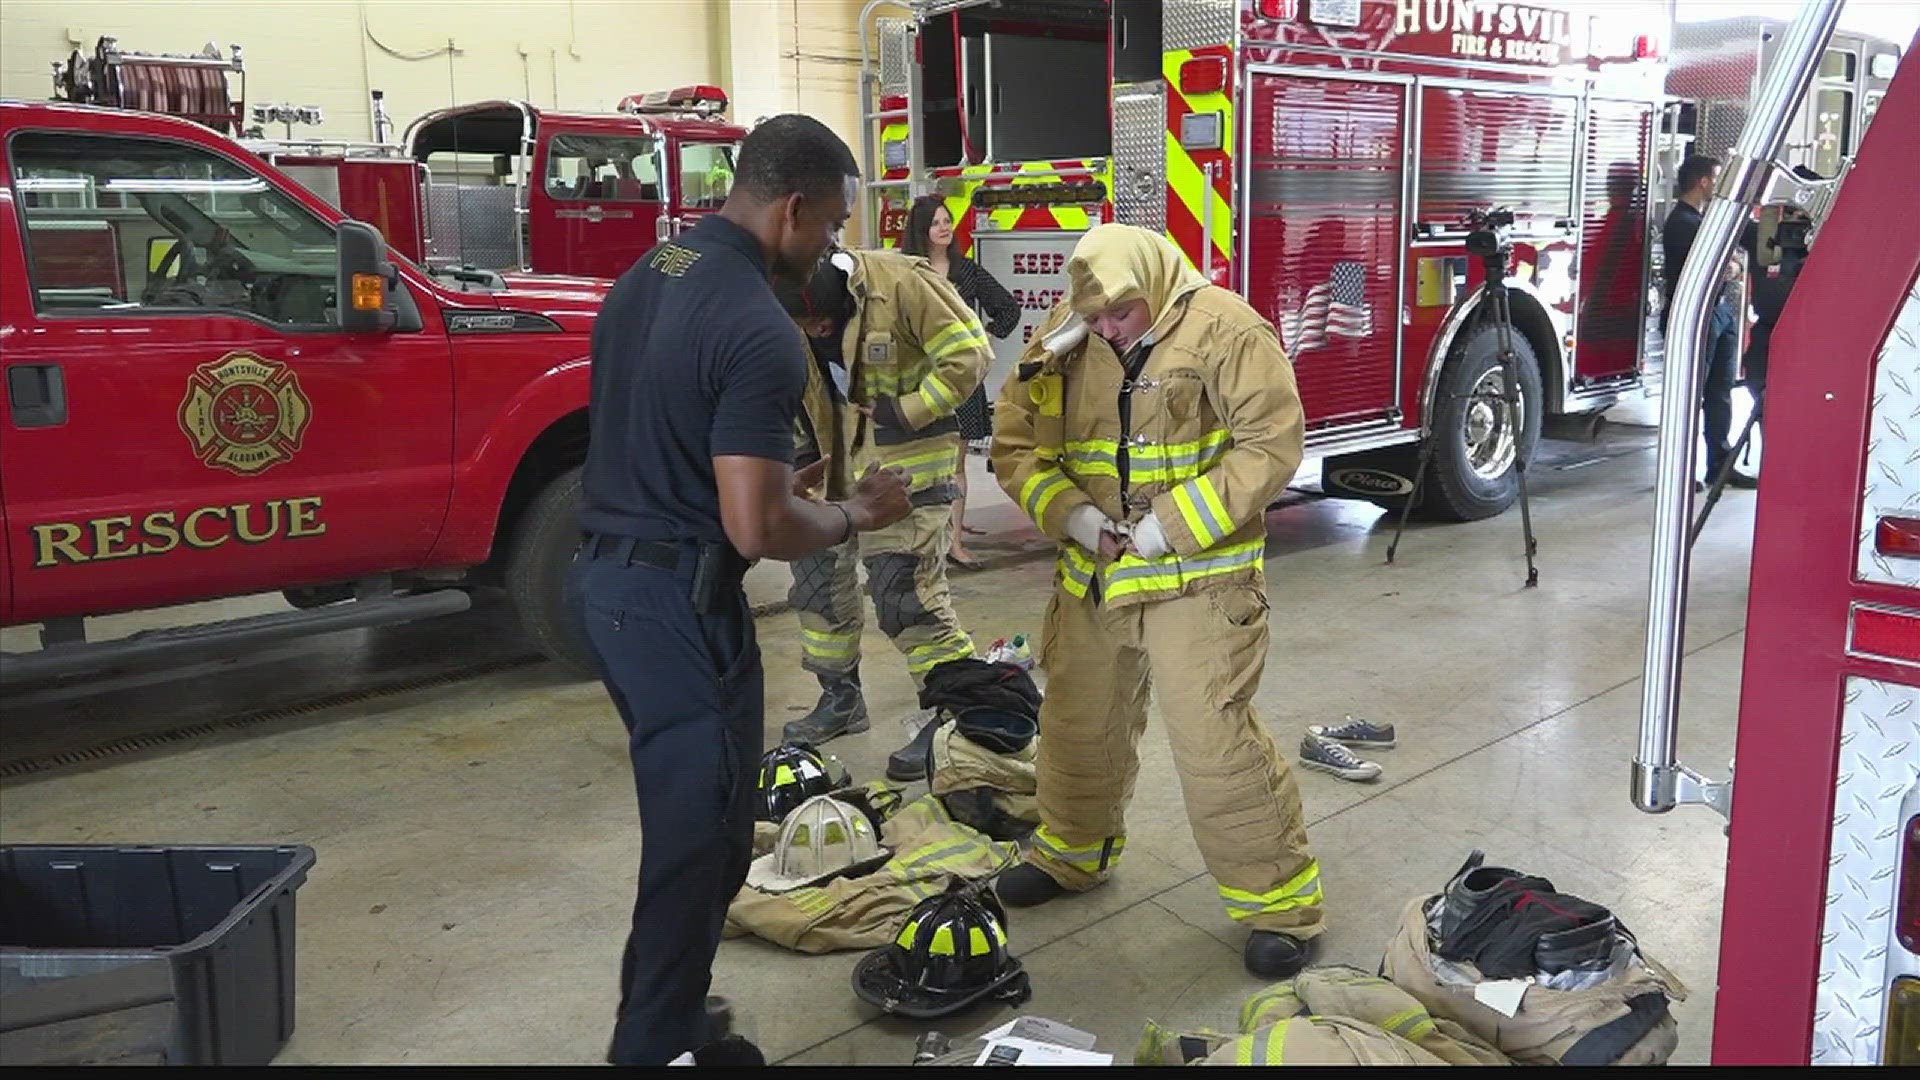 Huntsville Fire & Rescue opened its doors to FOX54 in order for our Nixon Norman to live a day in the life of a local firefighter.